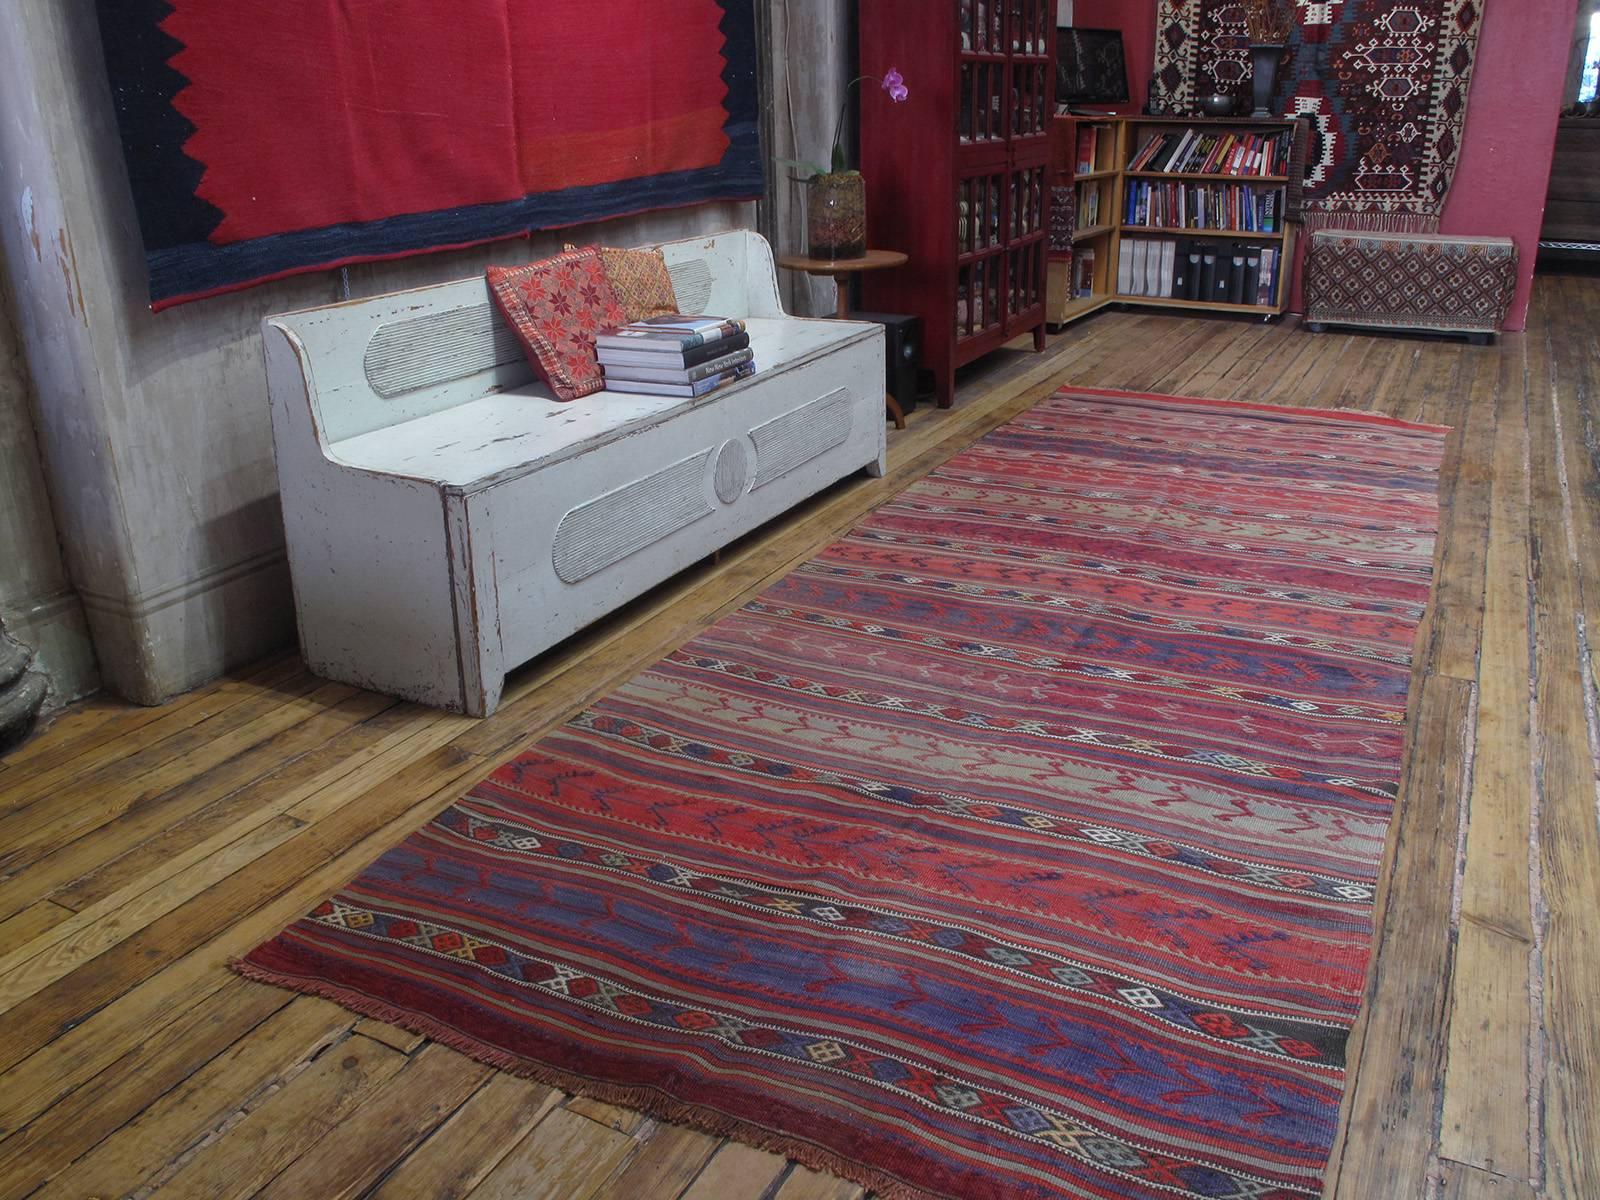 An old kilim (flat-weave) from Central Turkey, woven in the characteristic wide runner format, with alternating bands of color and brocaded motifs throughout. Can be shortened, if necessary.